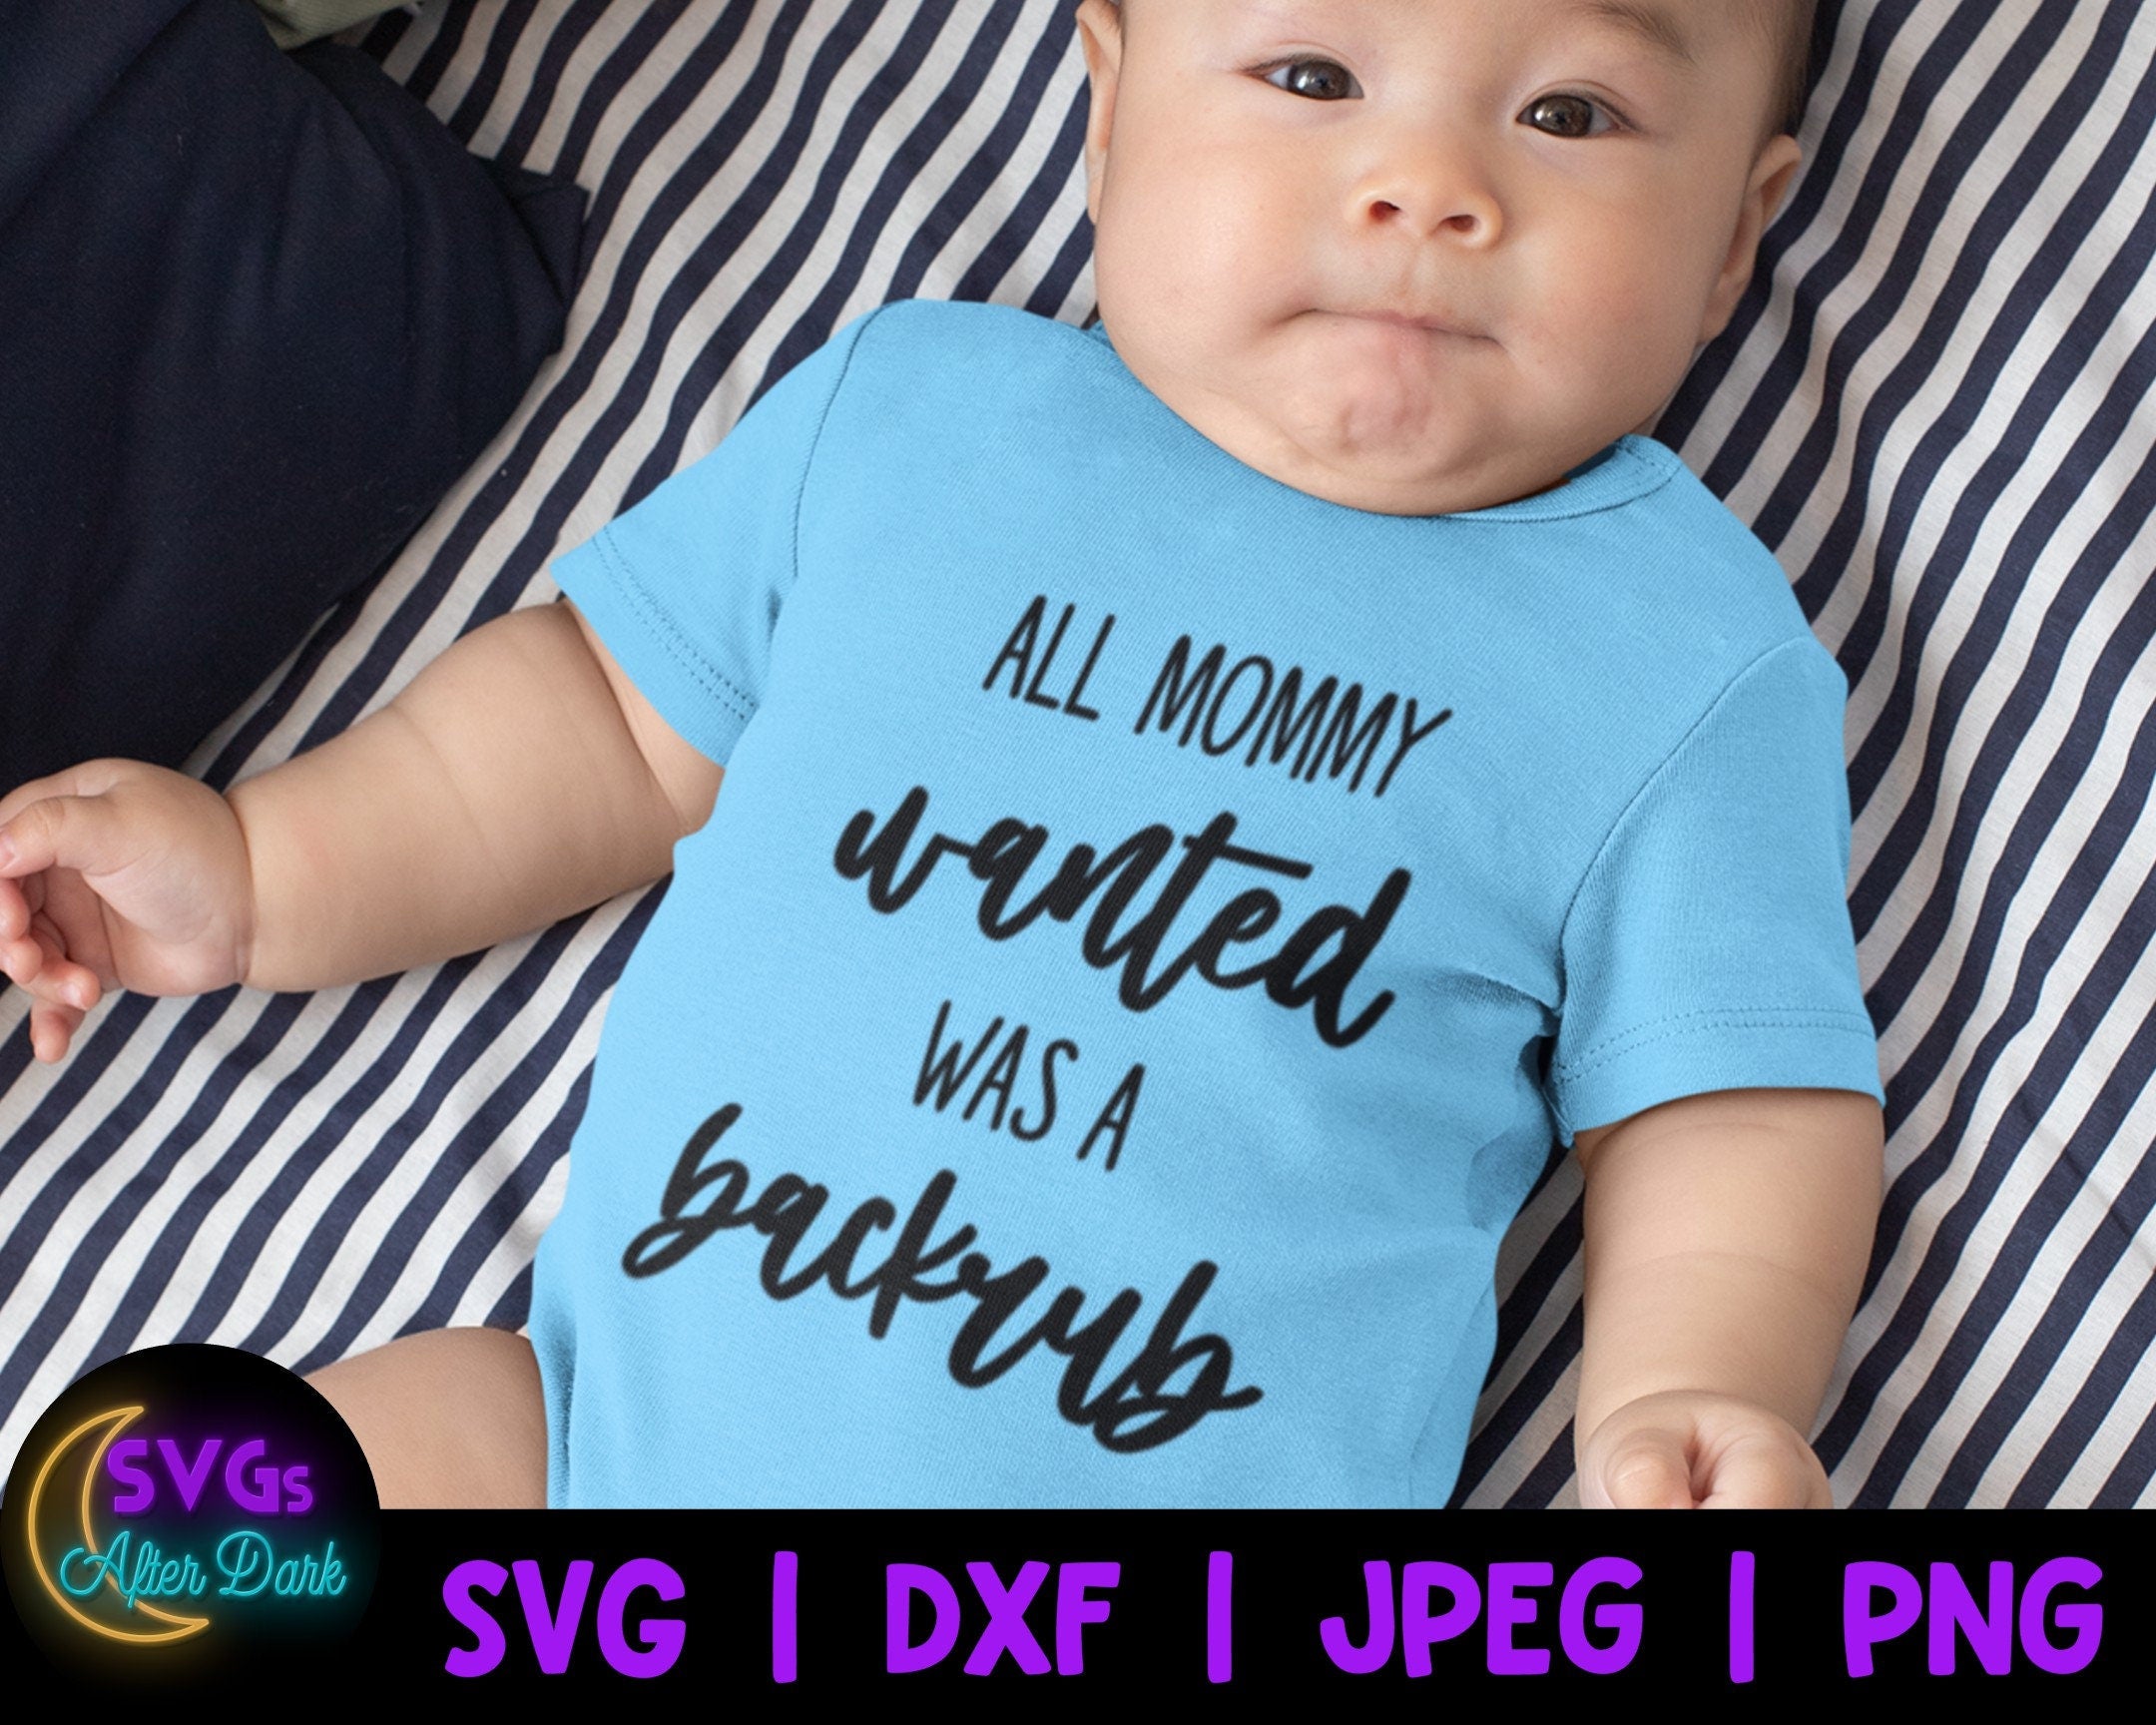 NSFW SVG - All Mommy Wanted Was a Backrub SVG - Adult Humor Baby Bodysuit